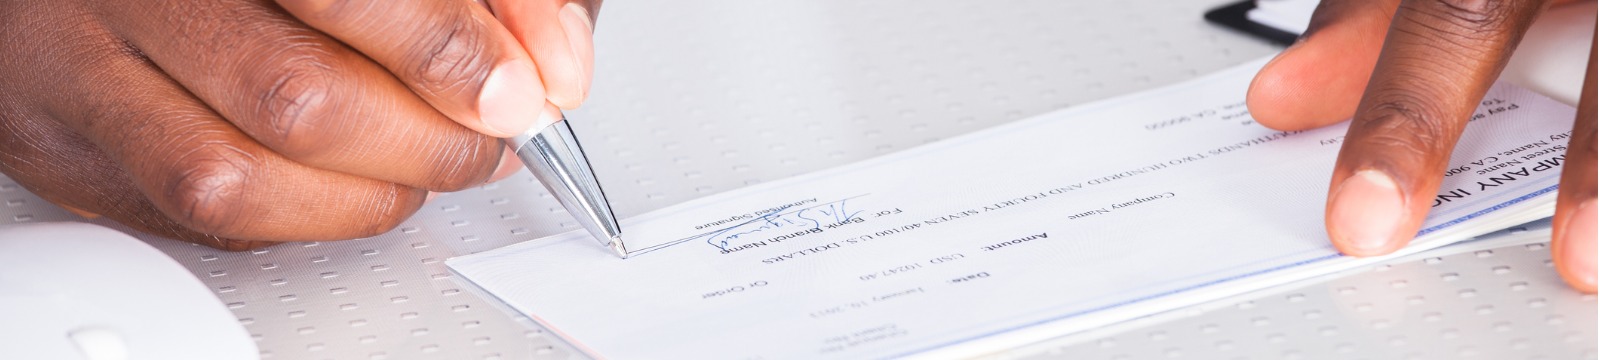 Picture of hands writing a check